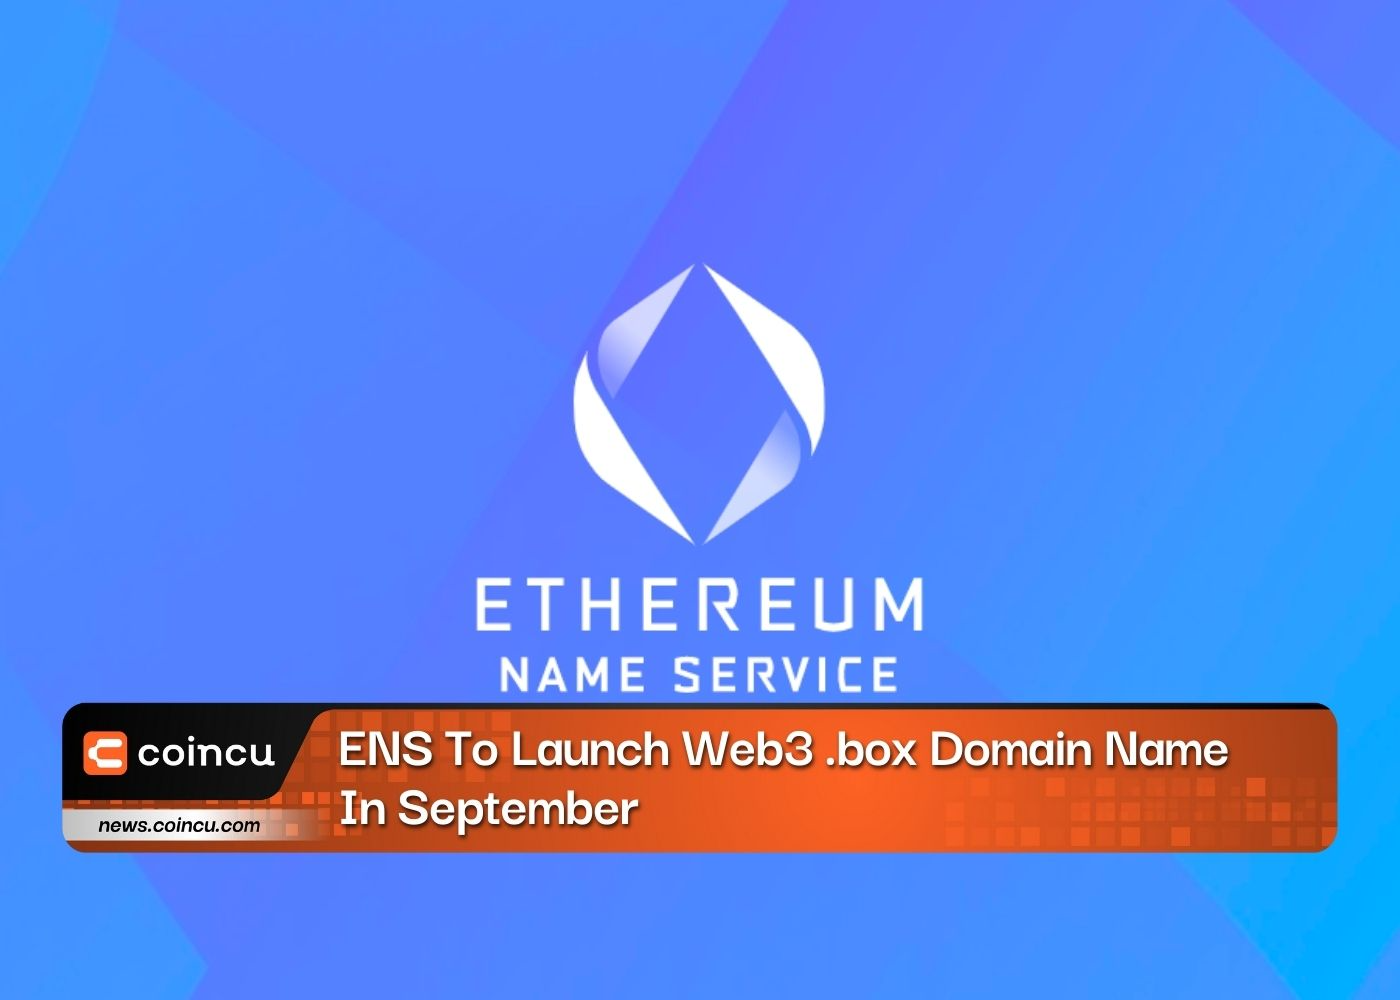 ENS To Launch Web3 .box Domain Name In September